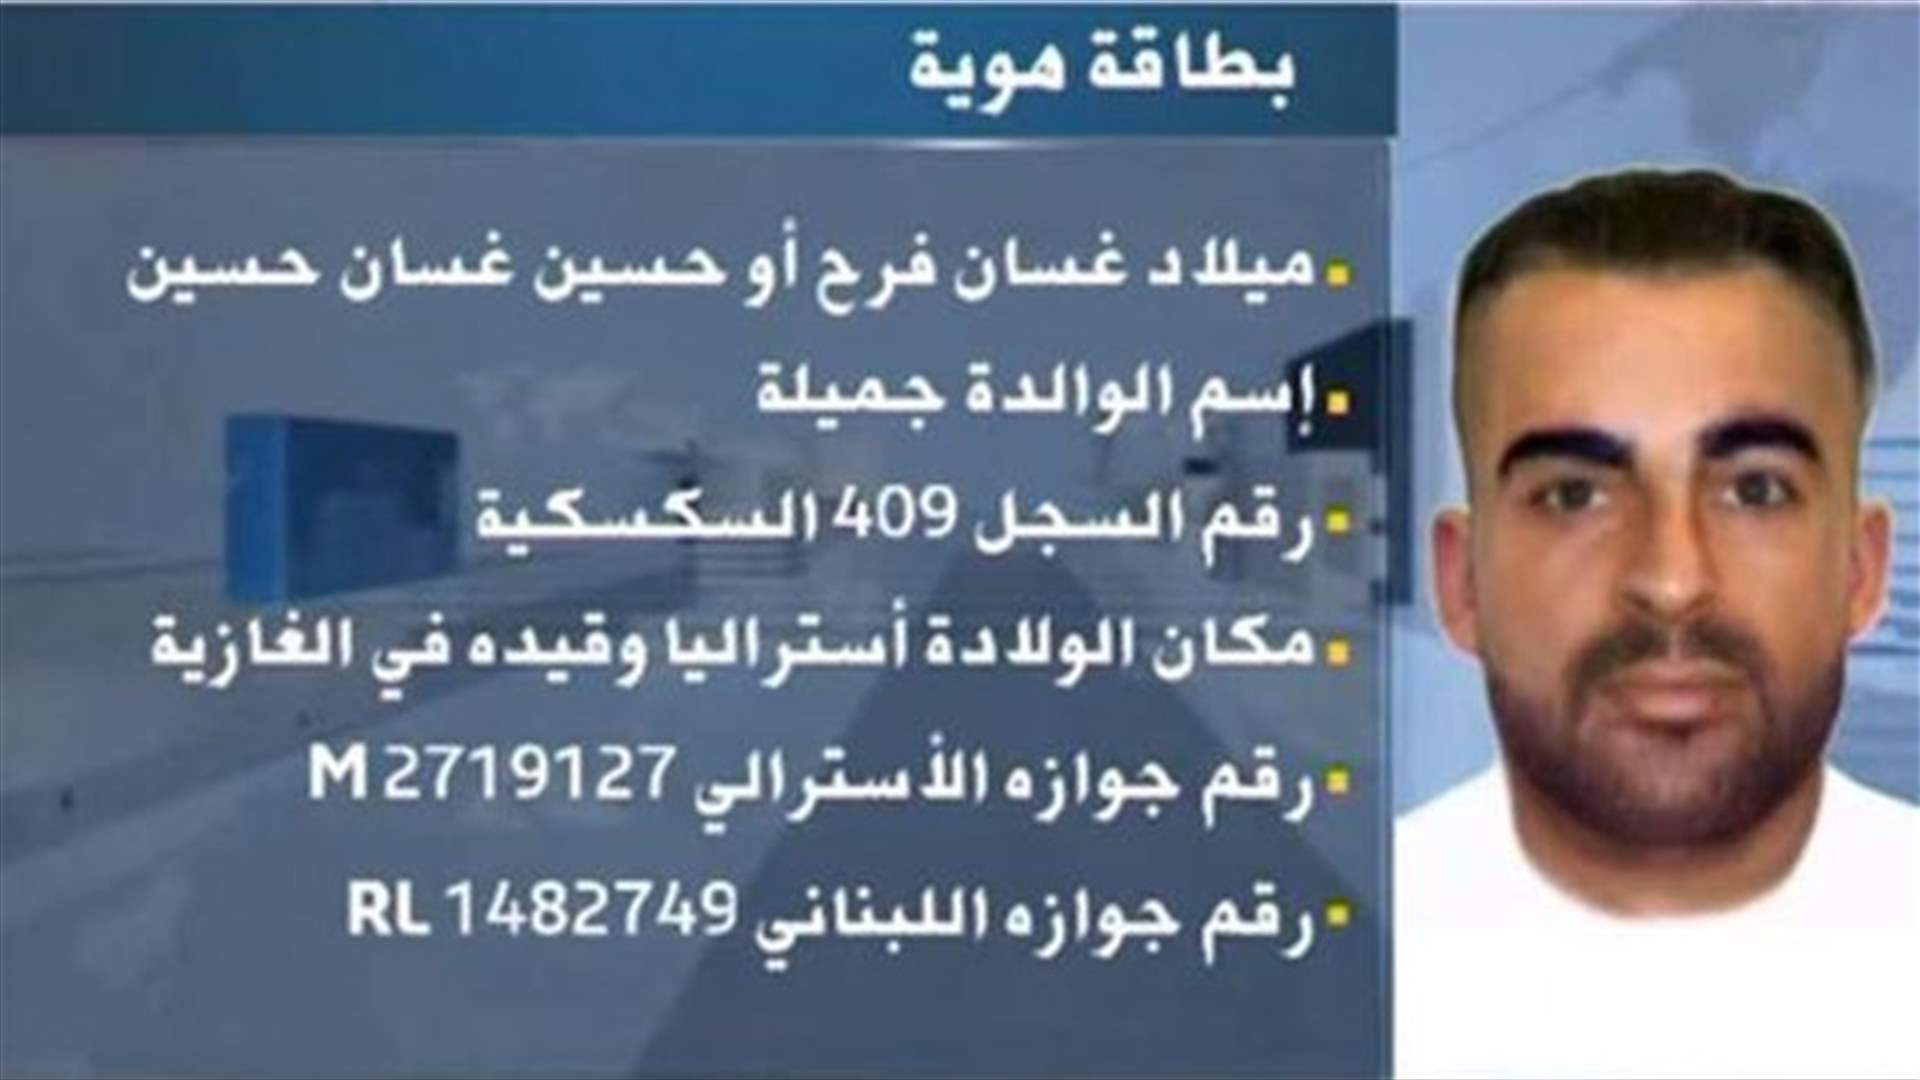 REPORT: LBCI reveals identity of suspect involved in the Burgas incident 